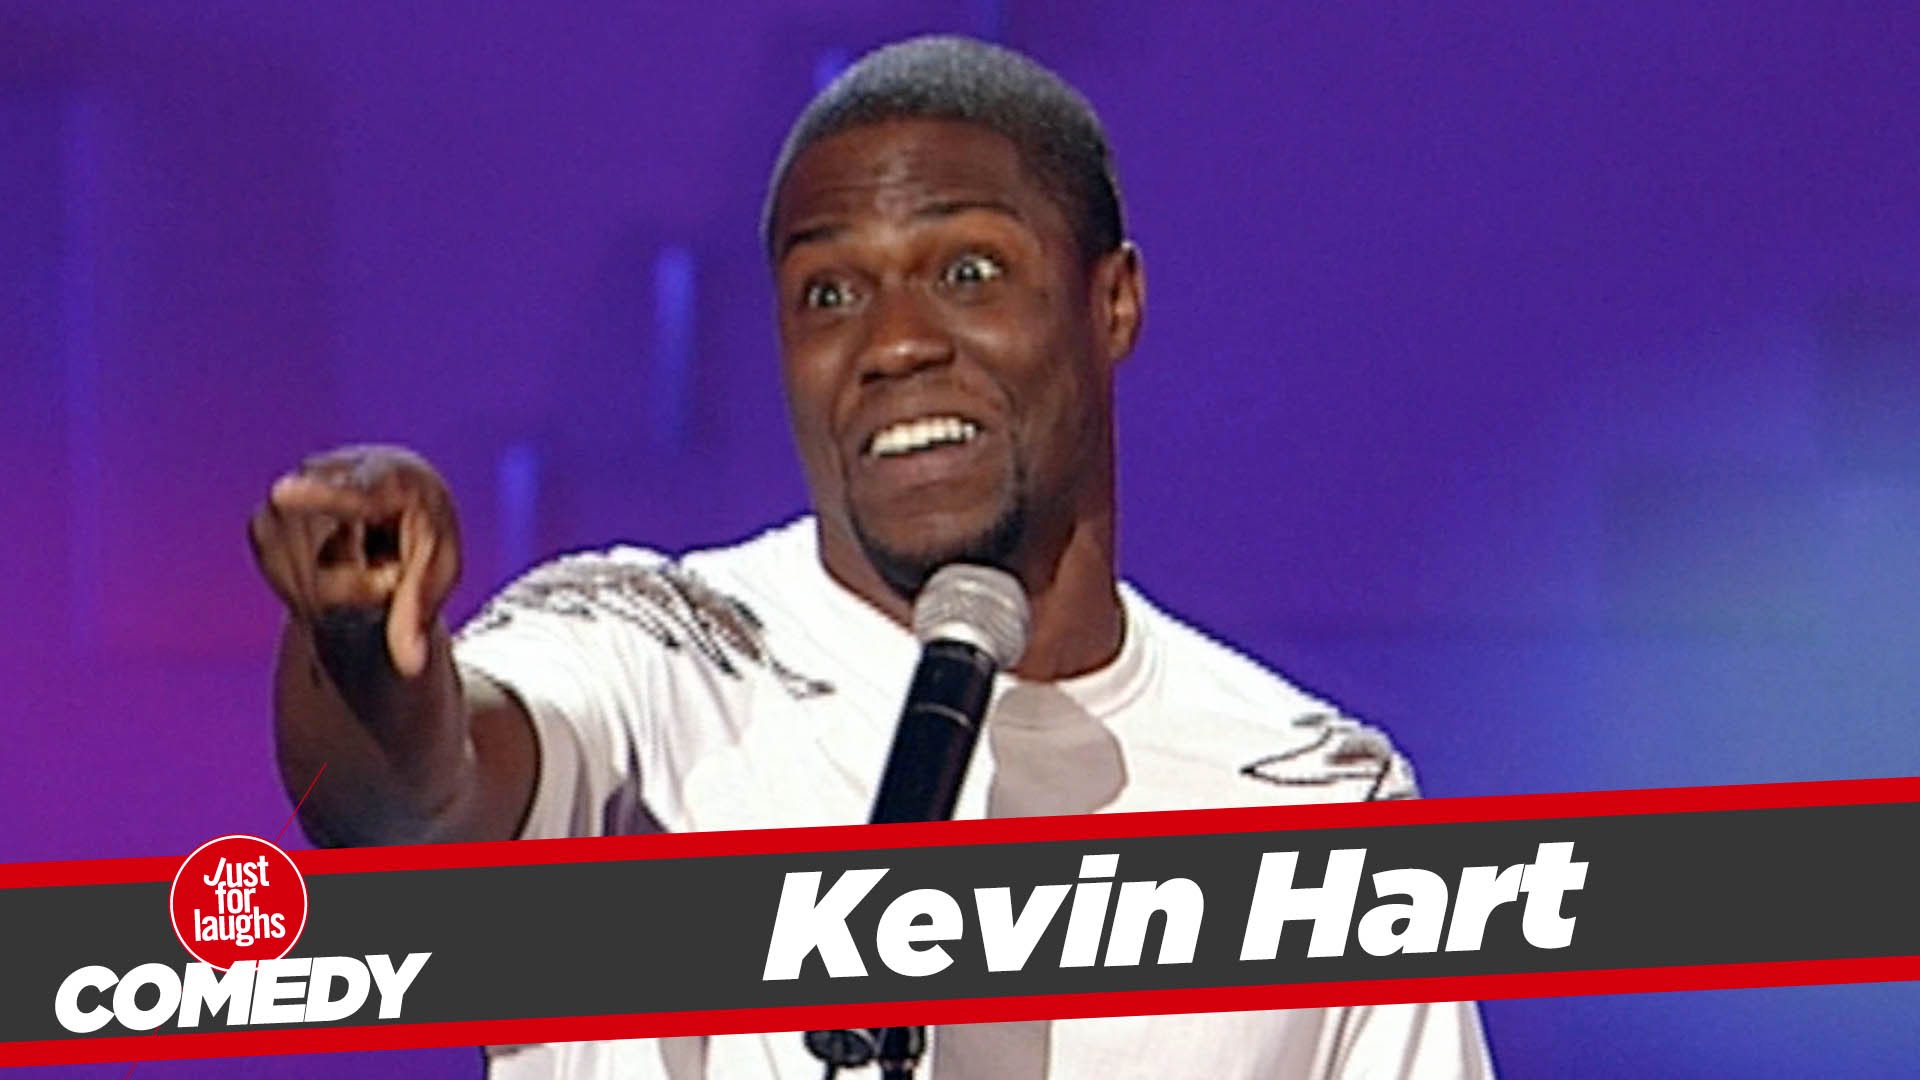 Kevin Hart Comedy Shows 2018 - TixBag Tickets, 